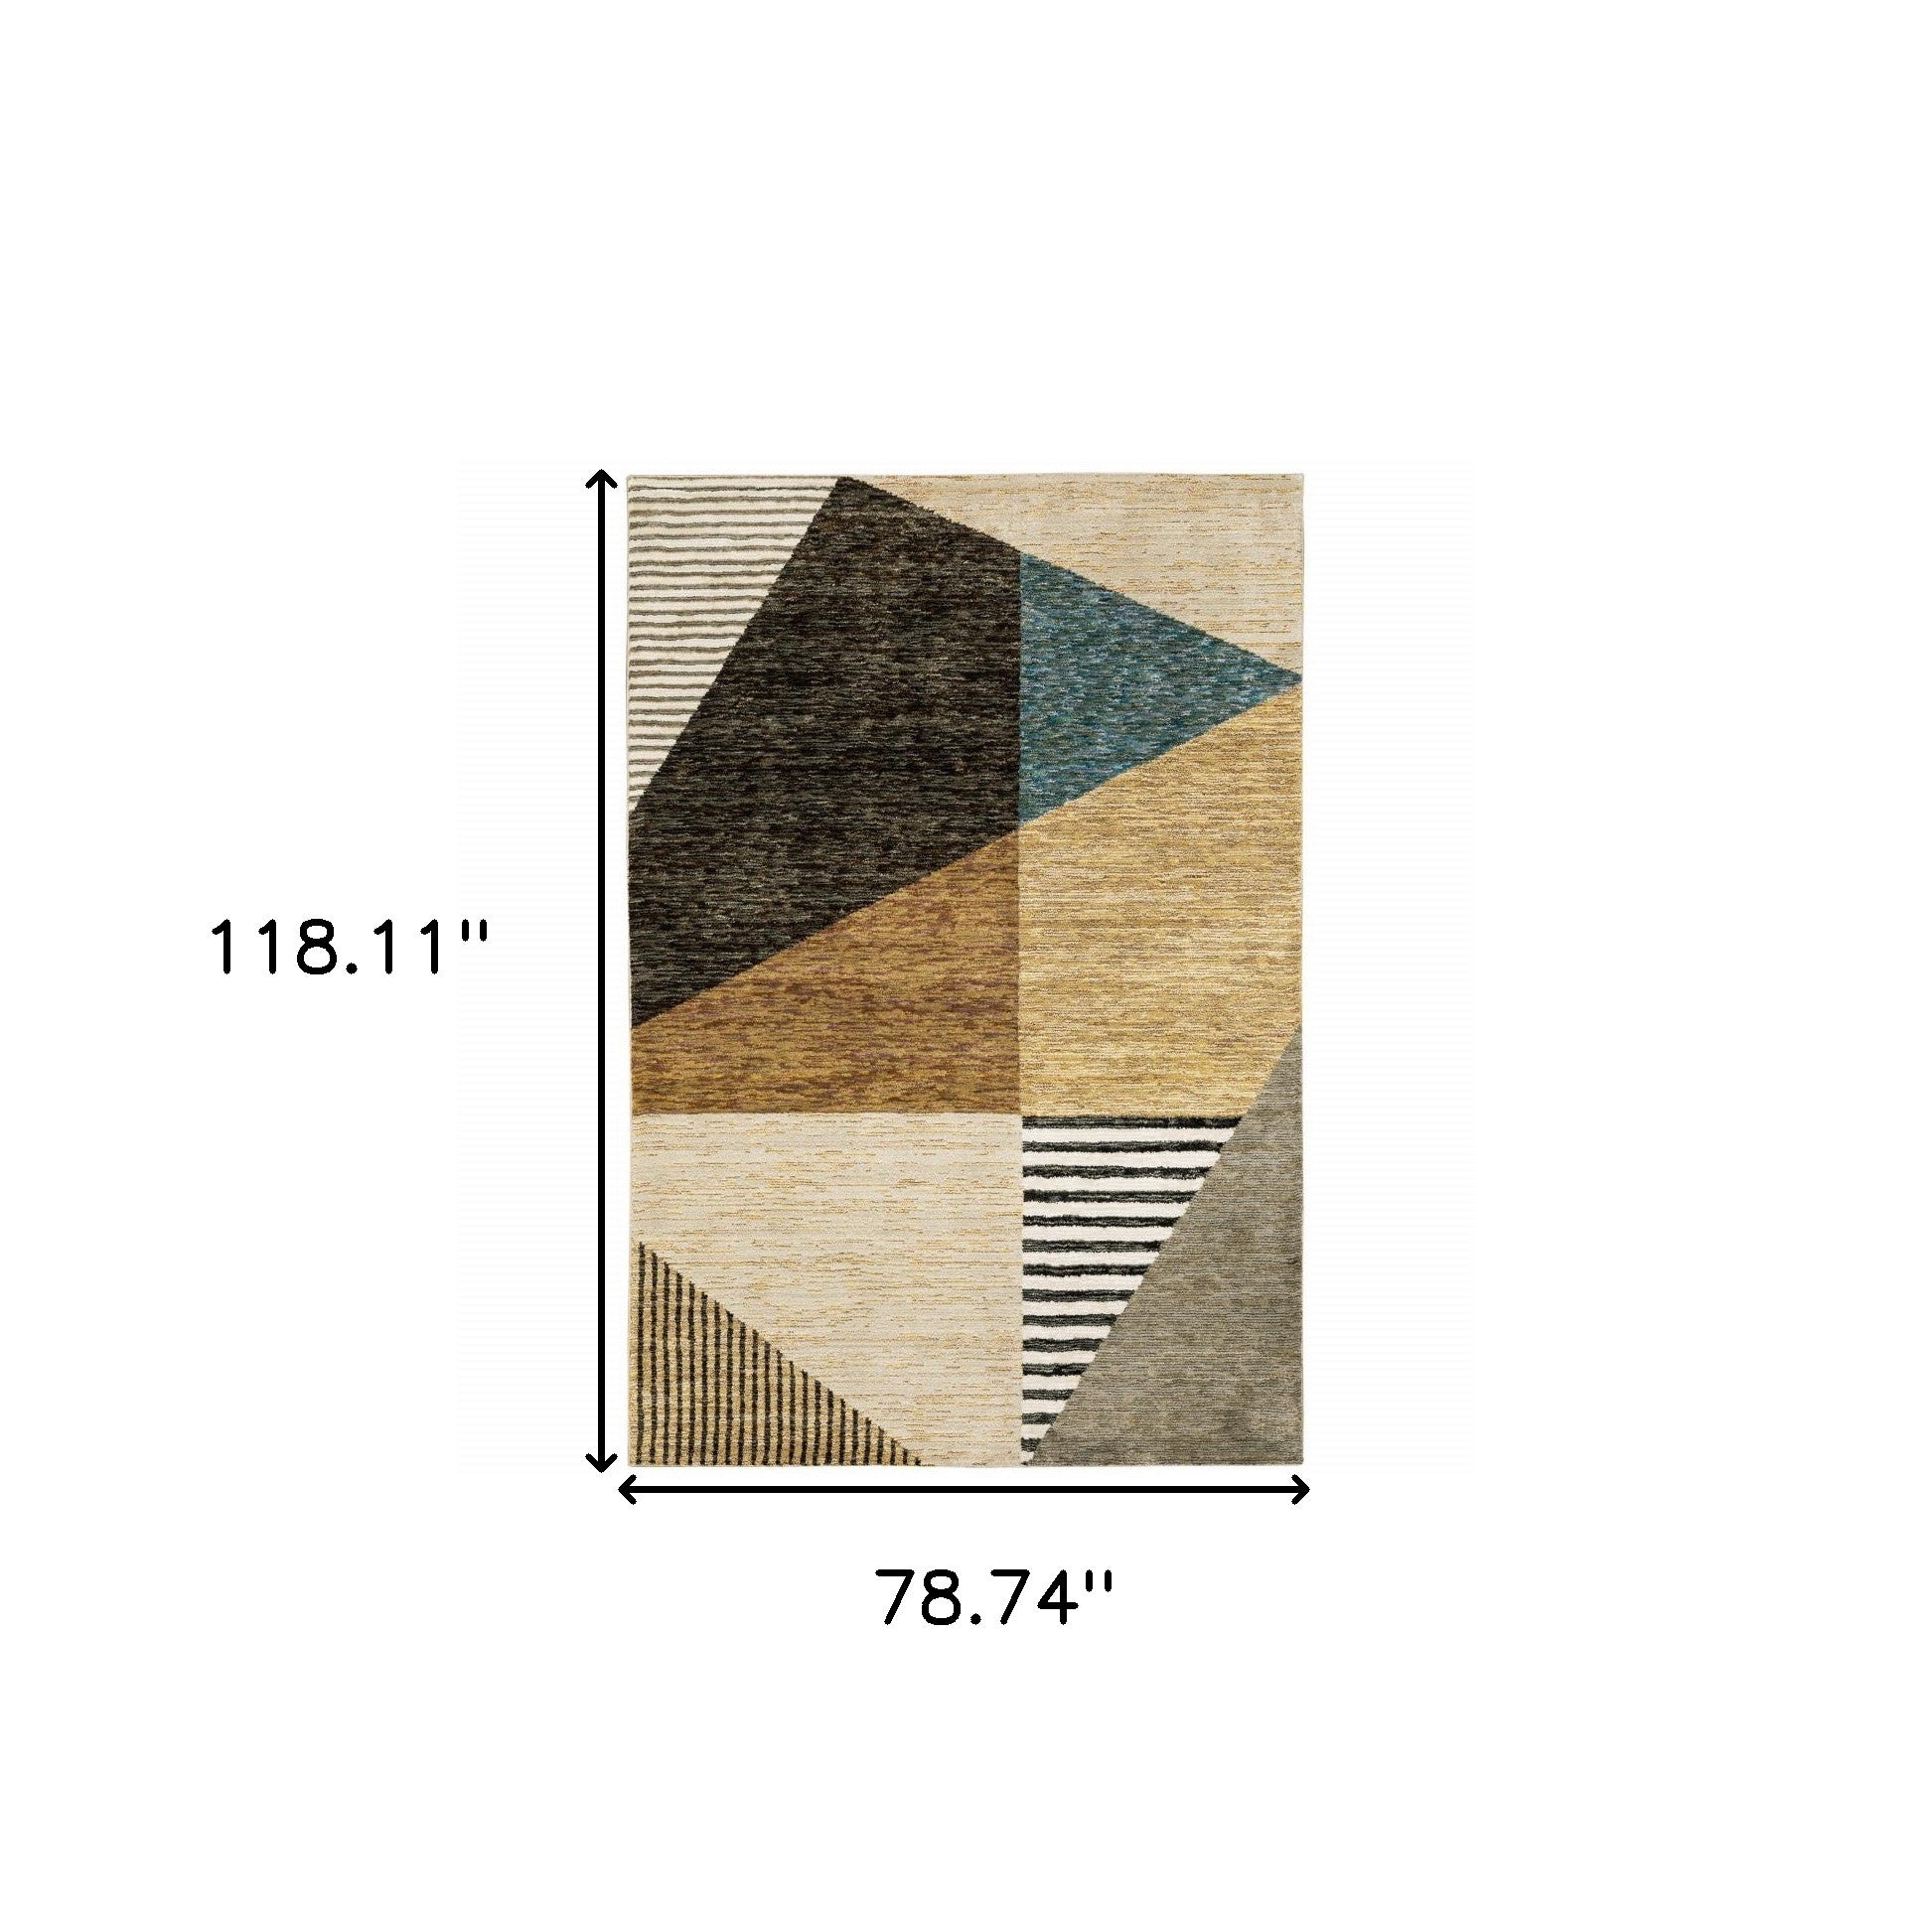 6' X 9' Gold Brown Blue Charcoal Rust And Beige Geometric Power Loom Stain Resistant Area Rug